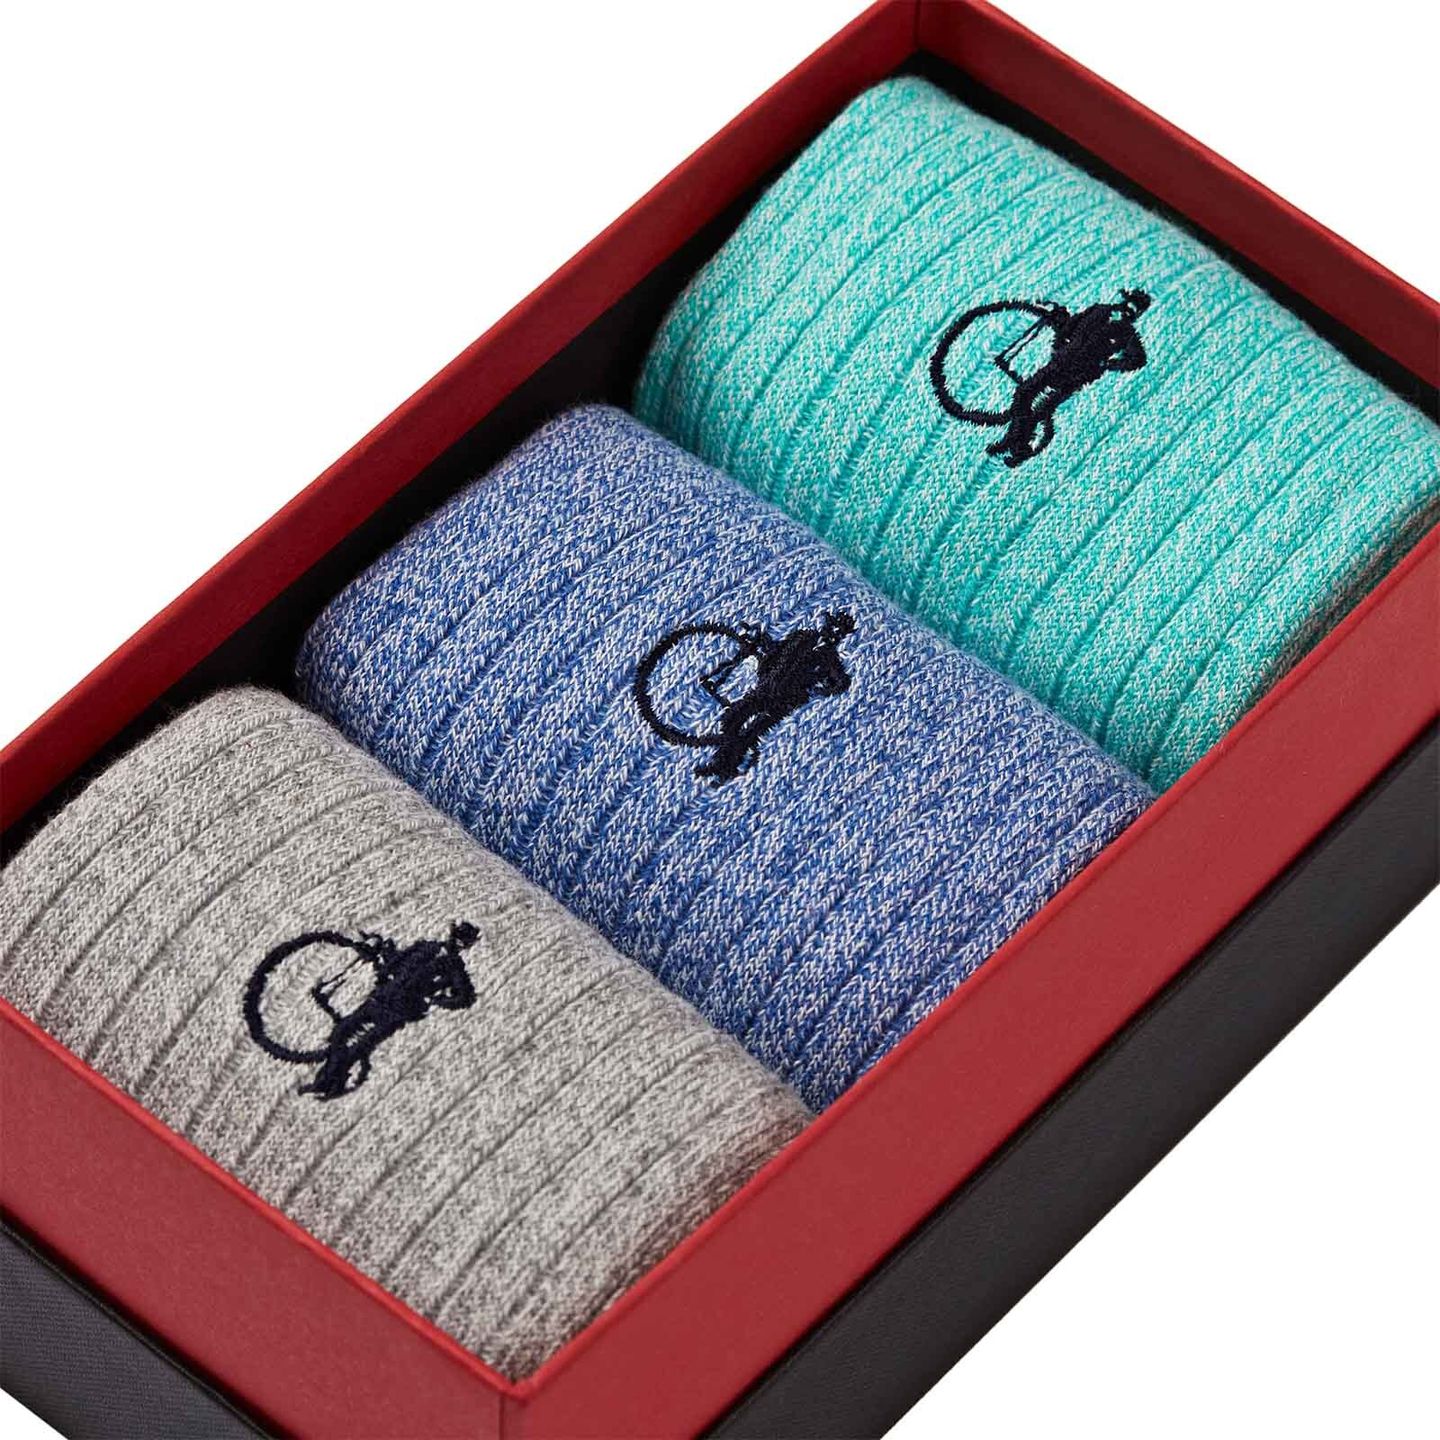 Presentation box for marl casual socks in teal, blue and a light grey